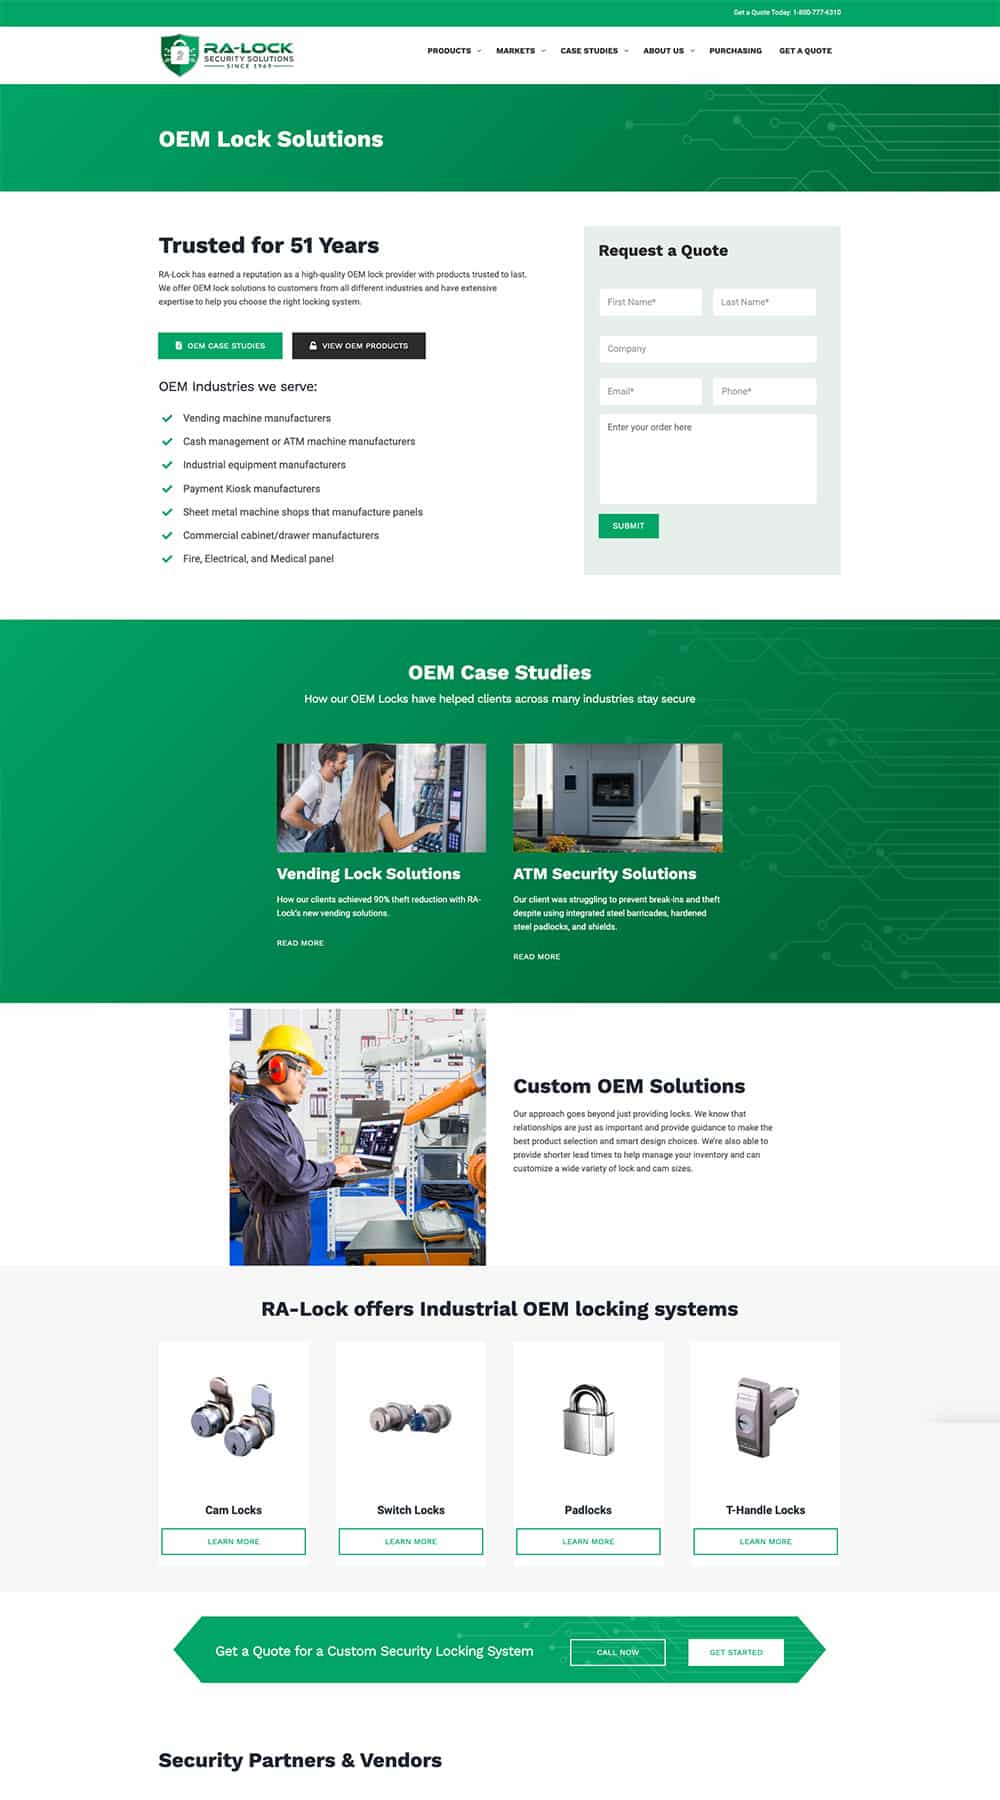 RALock OEM Solutions page